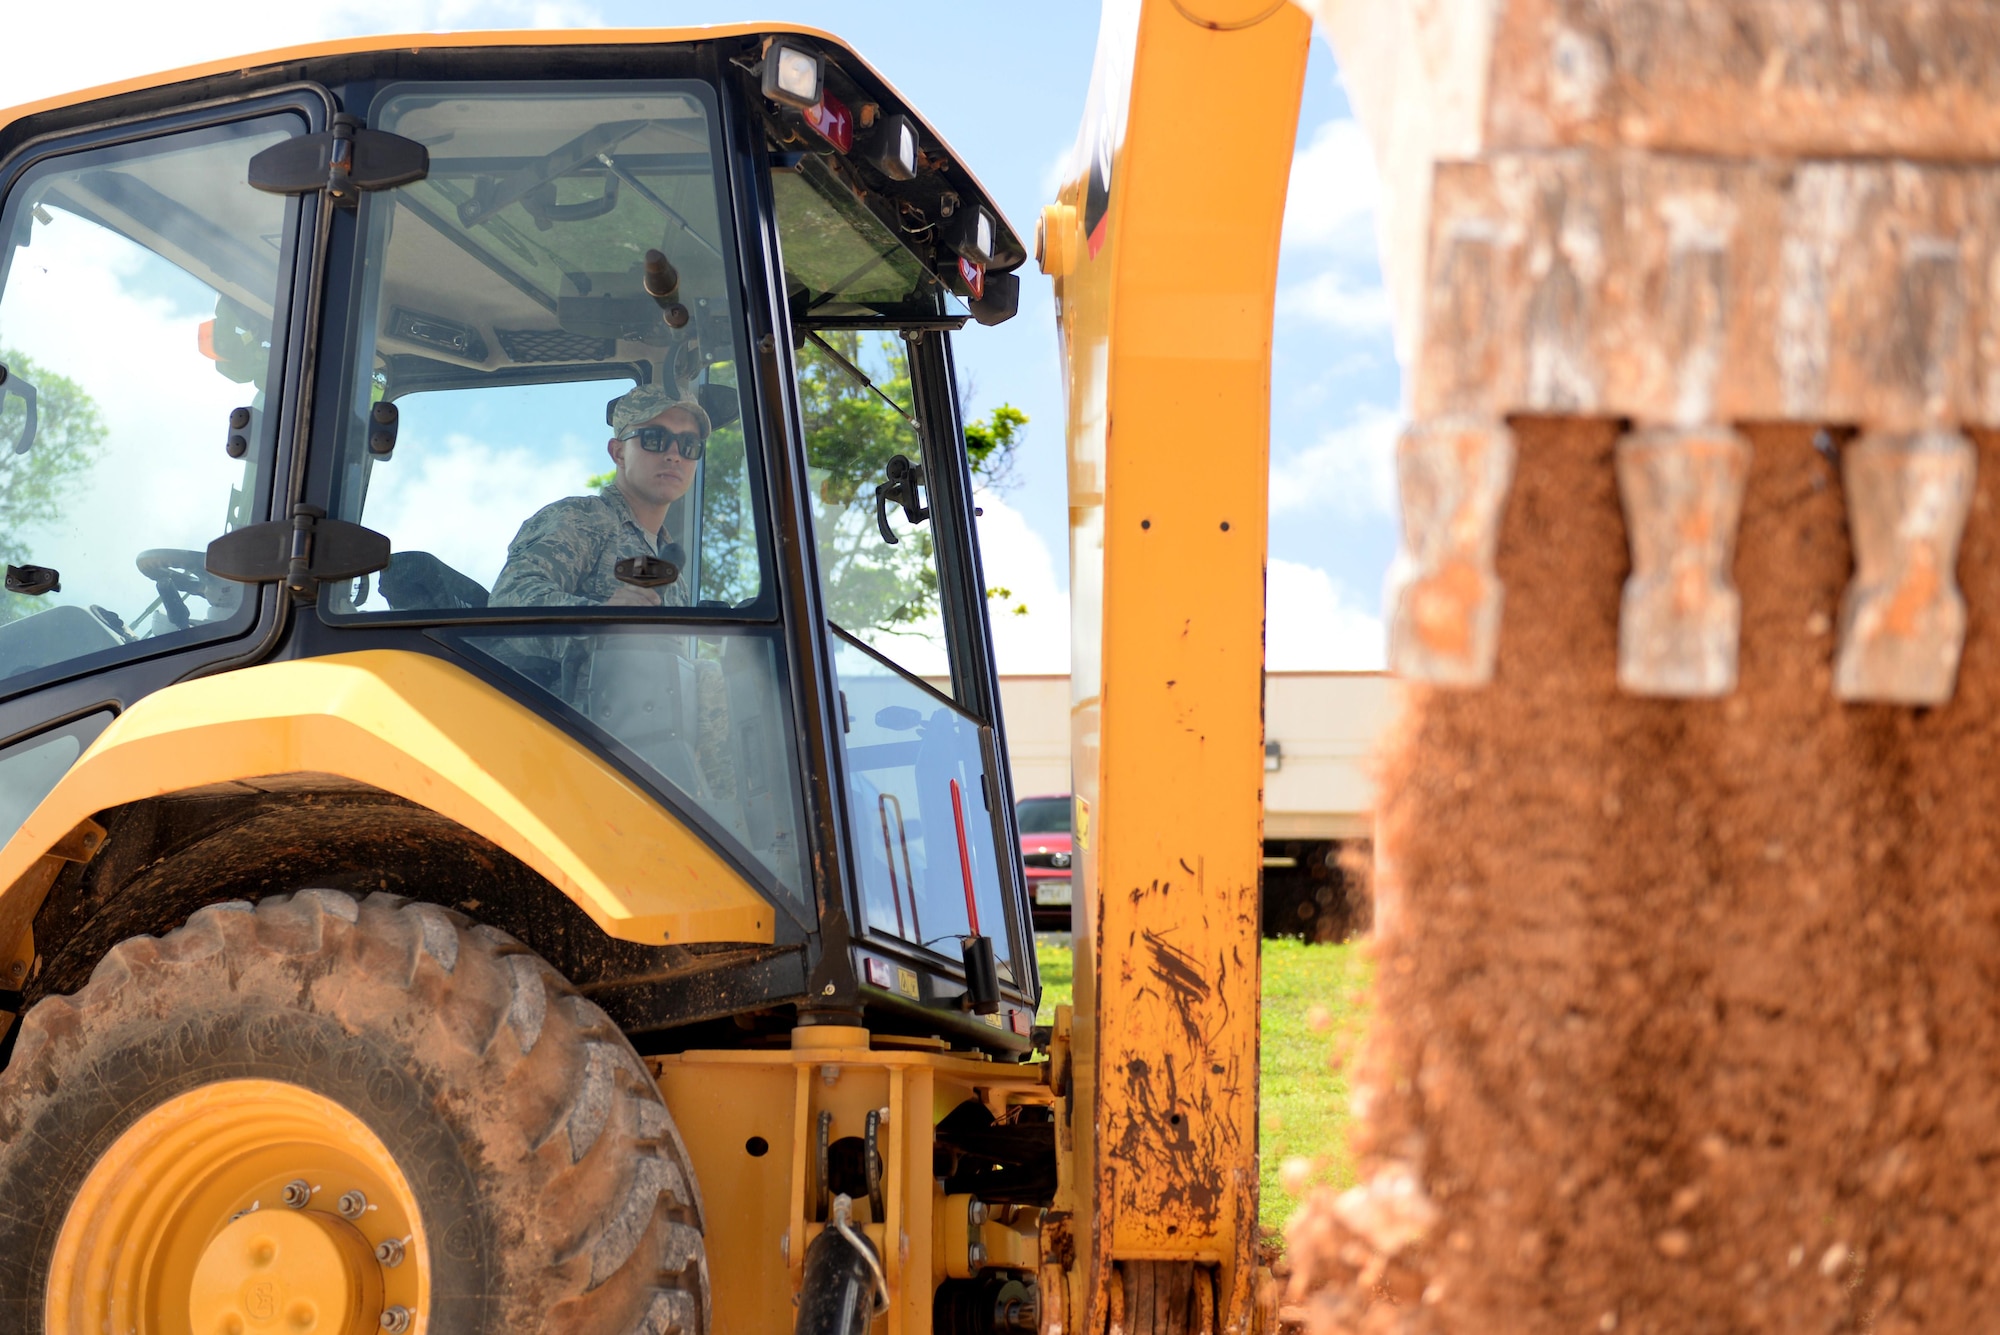 U.S. Air Force Airman 1st Class Austin Prendez, 36th Civil Engineering Squadron pavements and construction equipment journeyman, operates a front and backhoe loader May 2, 2017, at Andersen Air Force Base, Guam. The 36th CES is responsible for all facilities, infrastructure and two airfields with over 450 Airmen making it the largest squadron on Andersen AFB. (U.S. Air Force photo by Airman 1st Class Gerald R. Willis)